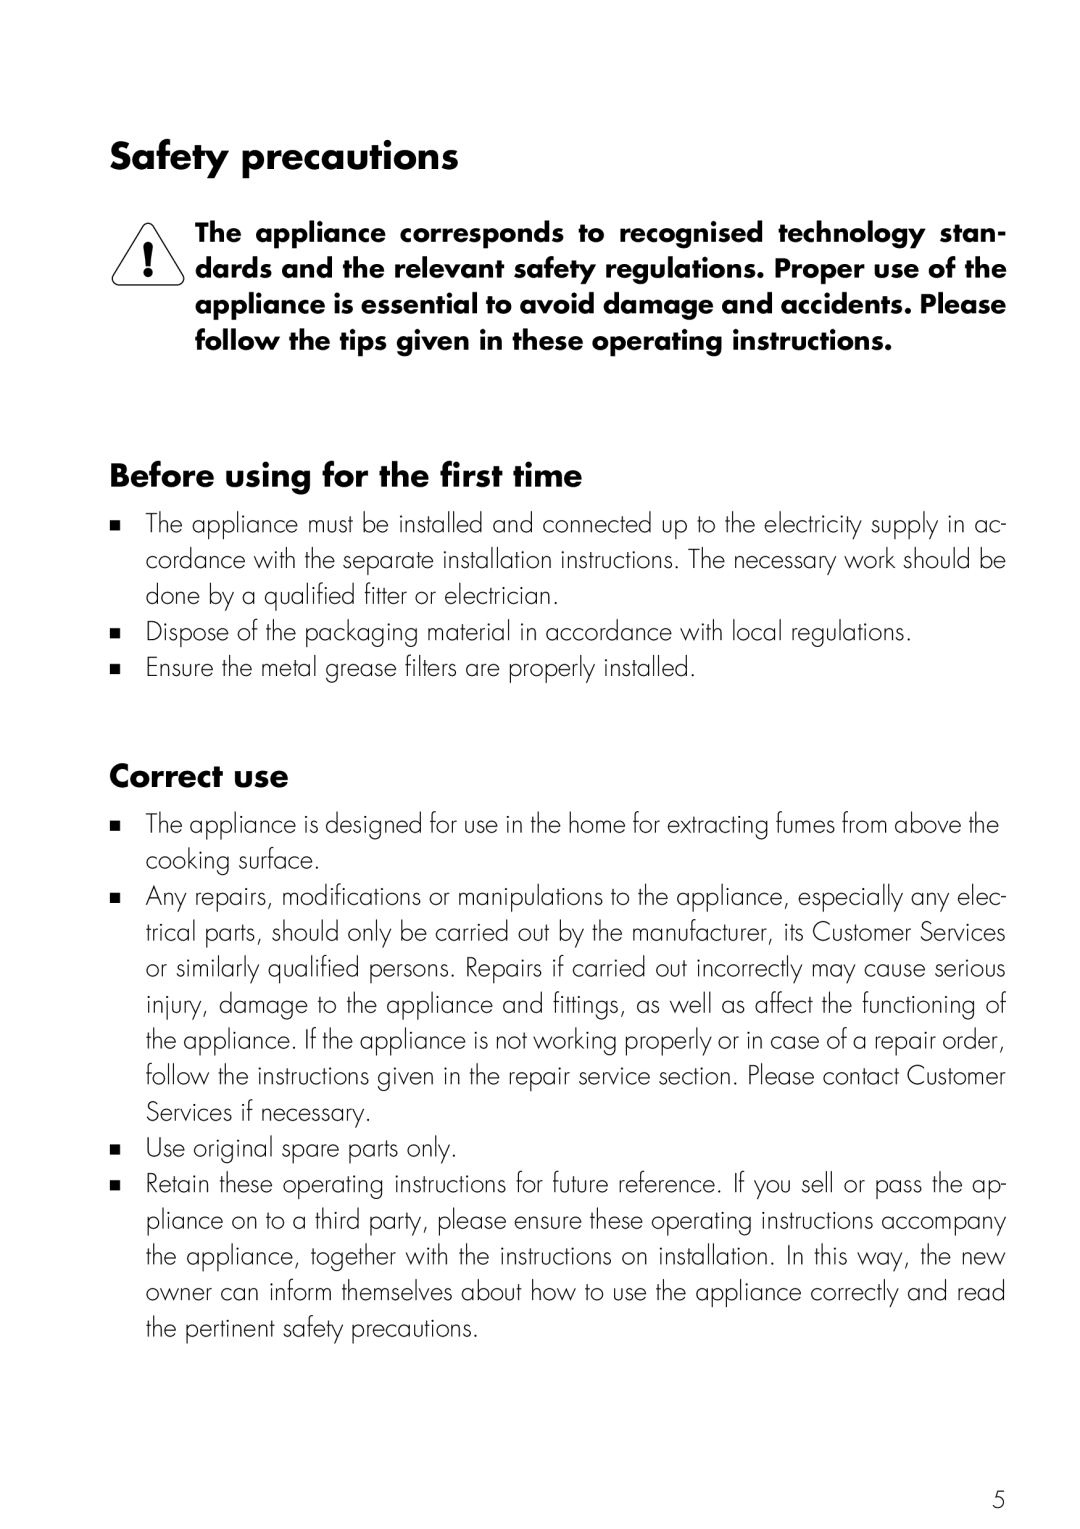 Mistral V ZUG LTD operating instructions Safety precautions, Before using for the first time, Correct use 